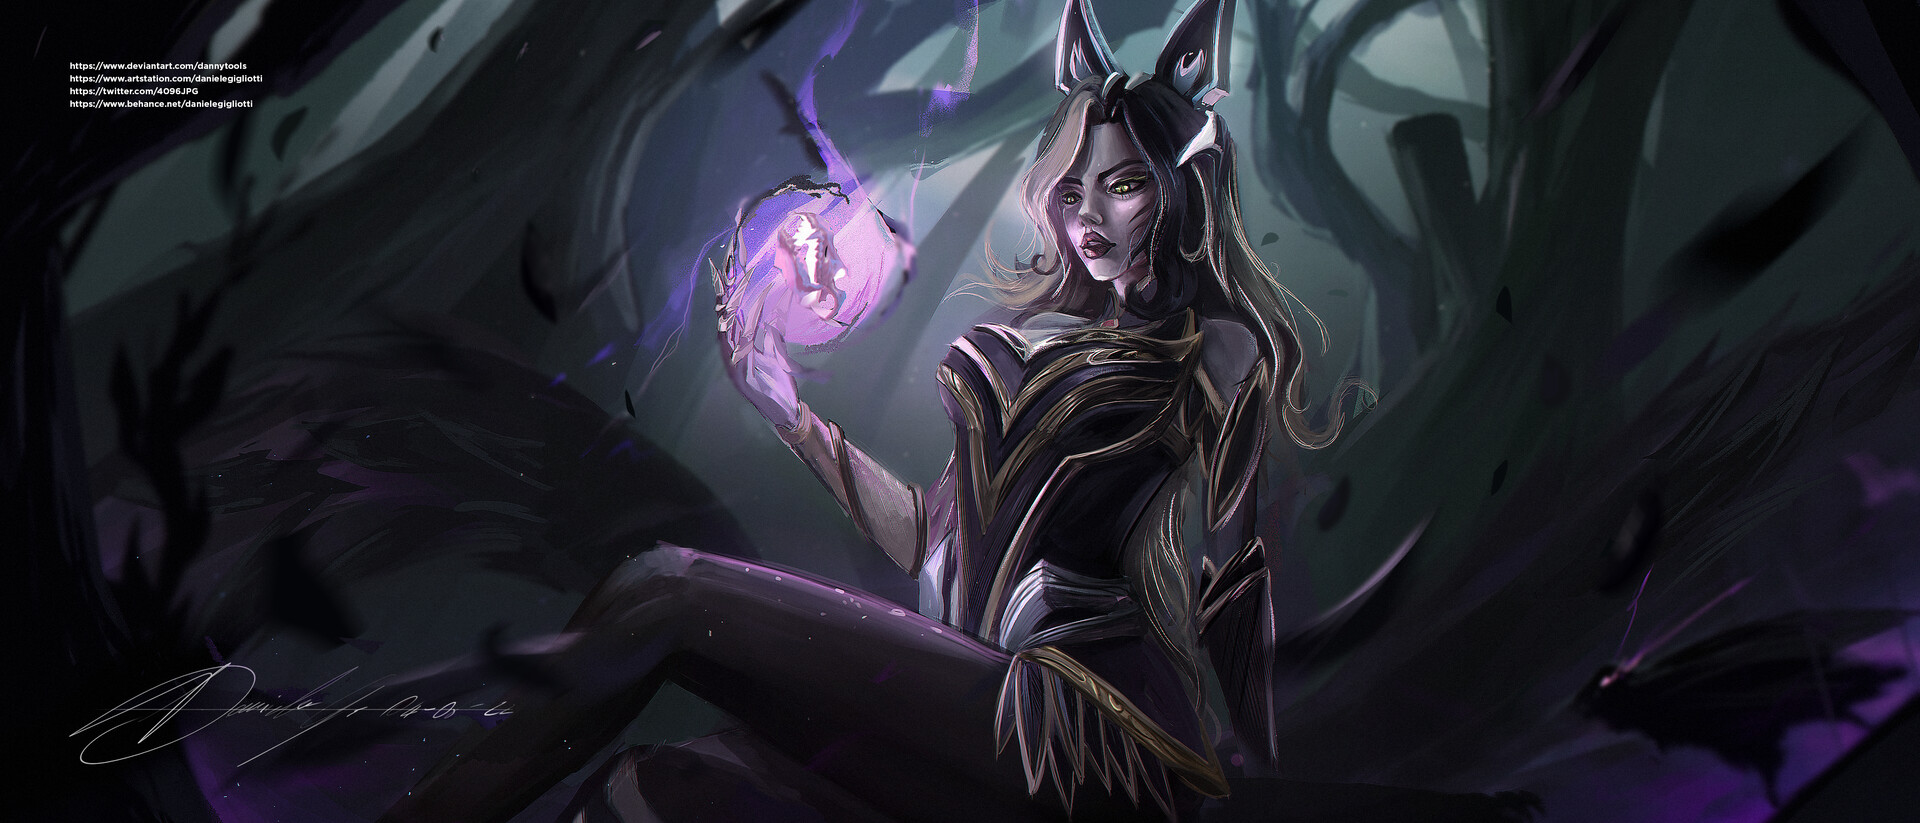 Coven Ahri Skin Concept 𝙖𝙧𝙩𝙞𝙨𝙩: Unstable Anomaly 𝙥𝙡𝙖𝙩𝙛𝙤𝙧𝙢:  ArtStation (from @adoerablearts on Instagram who reposts others work)